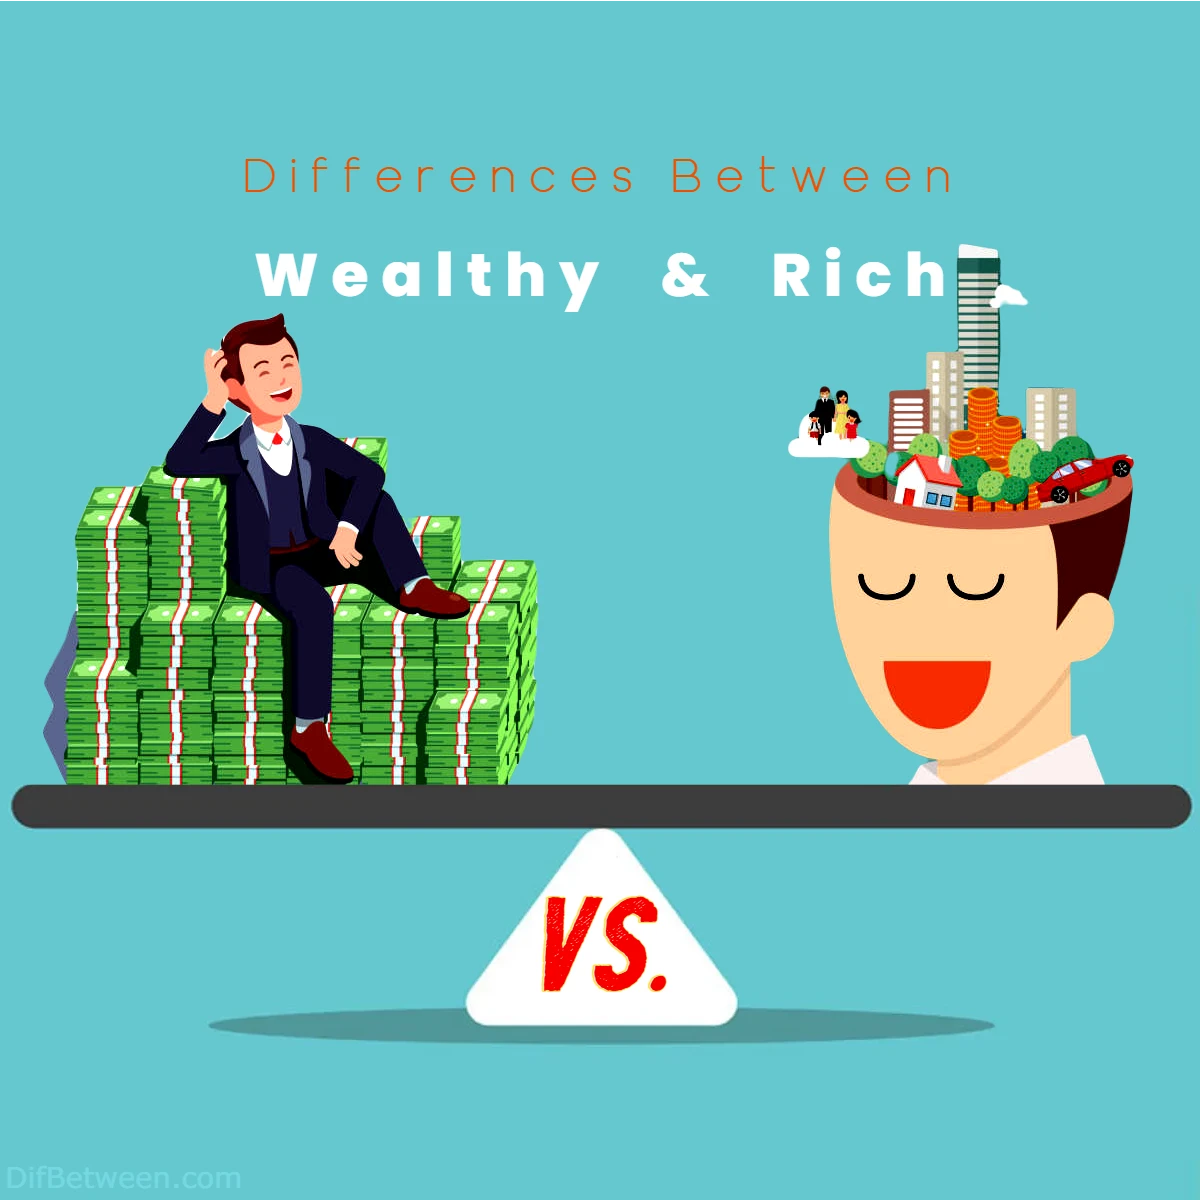 Differences Between Wealthy vs Rich